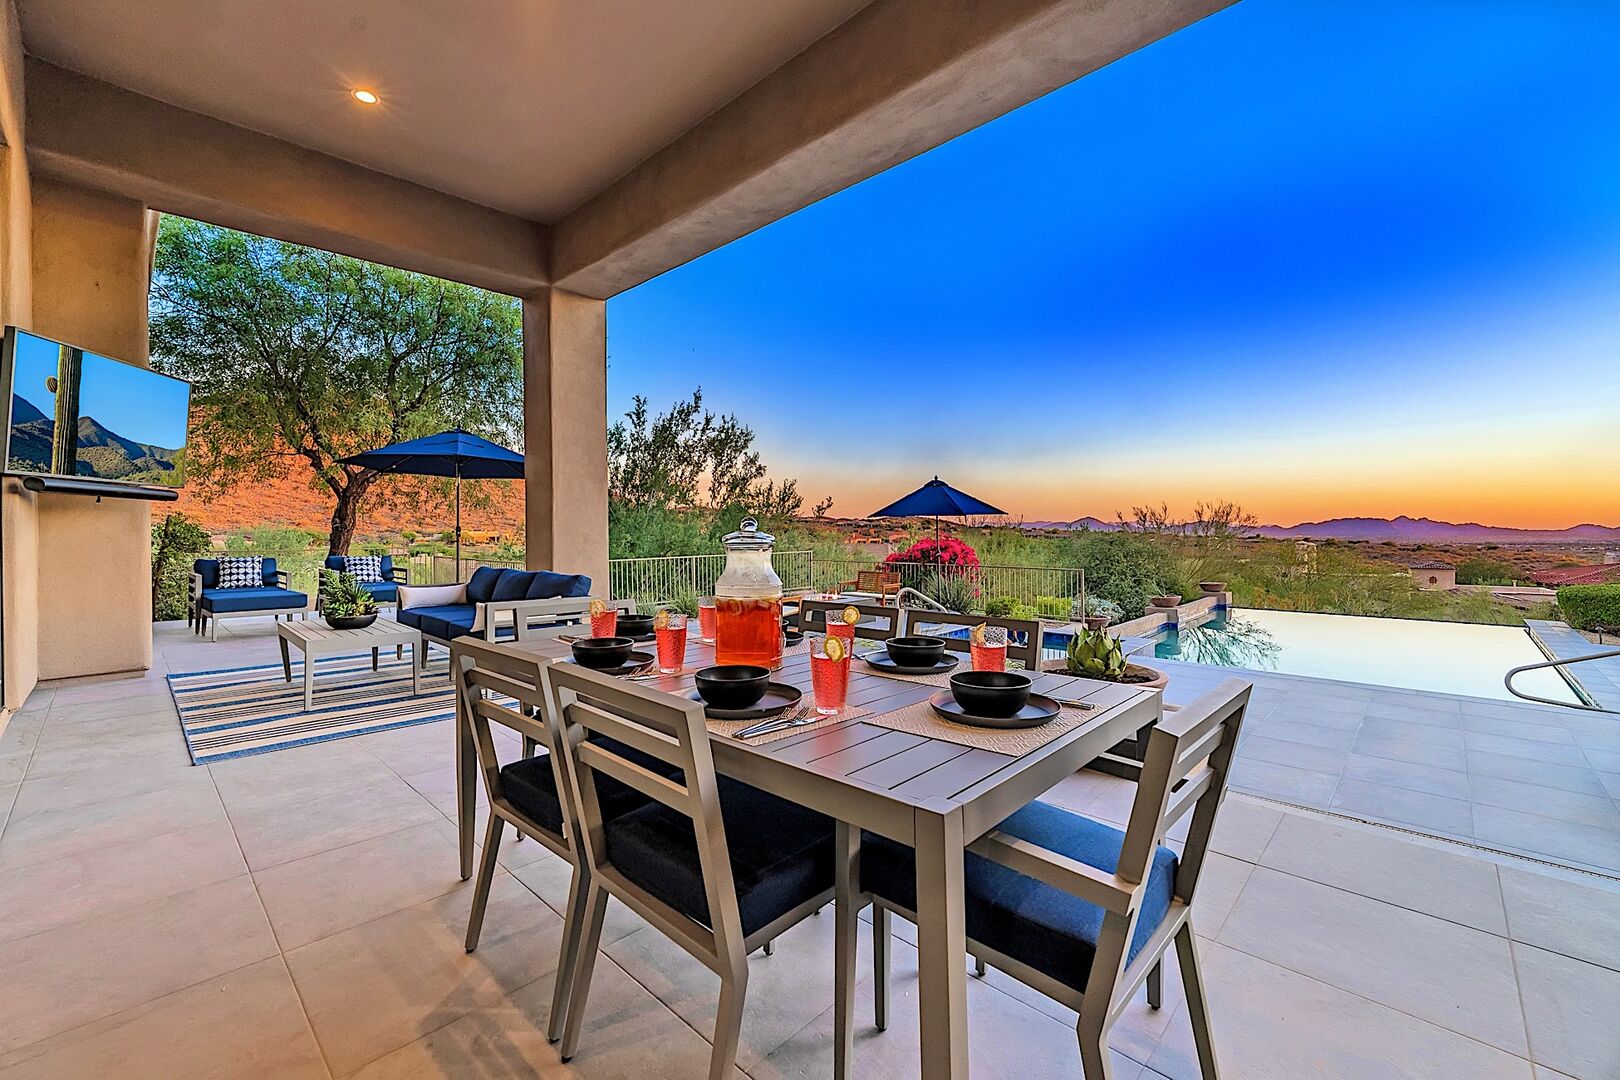 Outdoor dining area at sunset